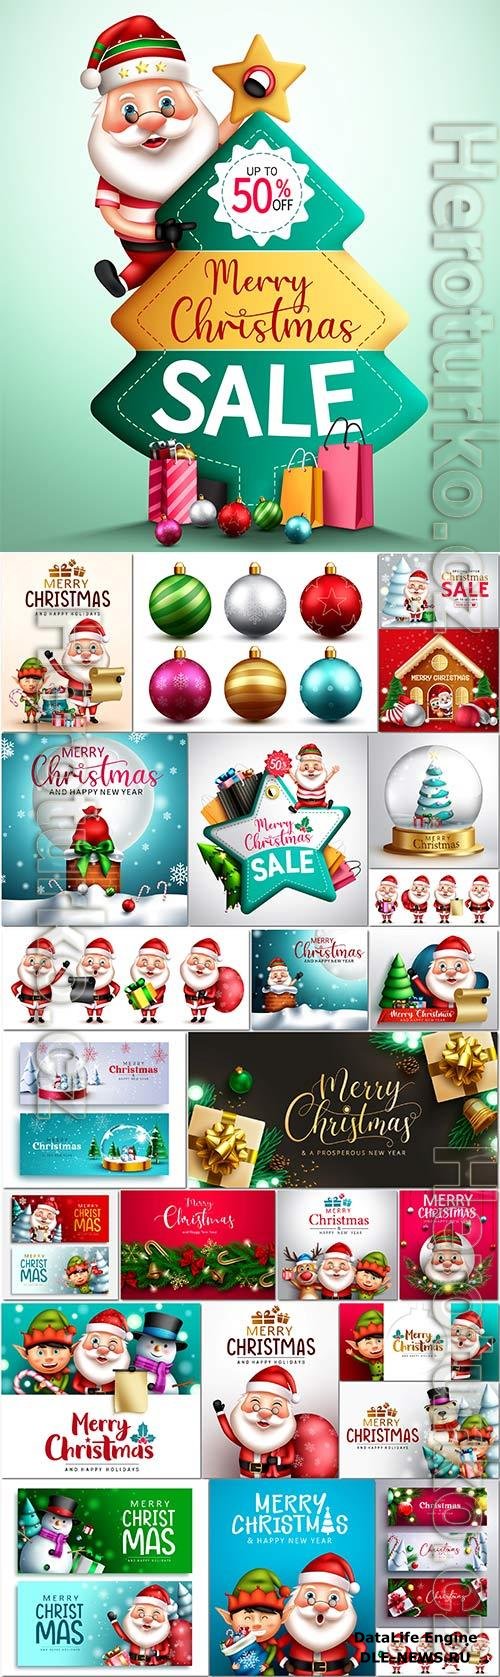 Christmas characters vector set merry christmas greeting text with santa claus